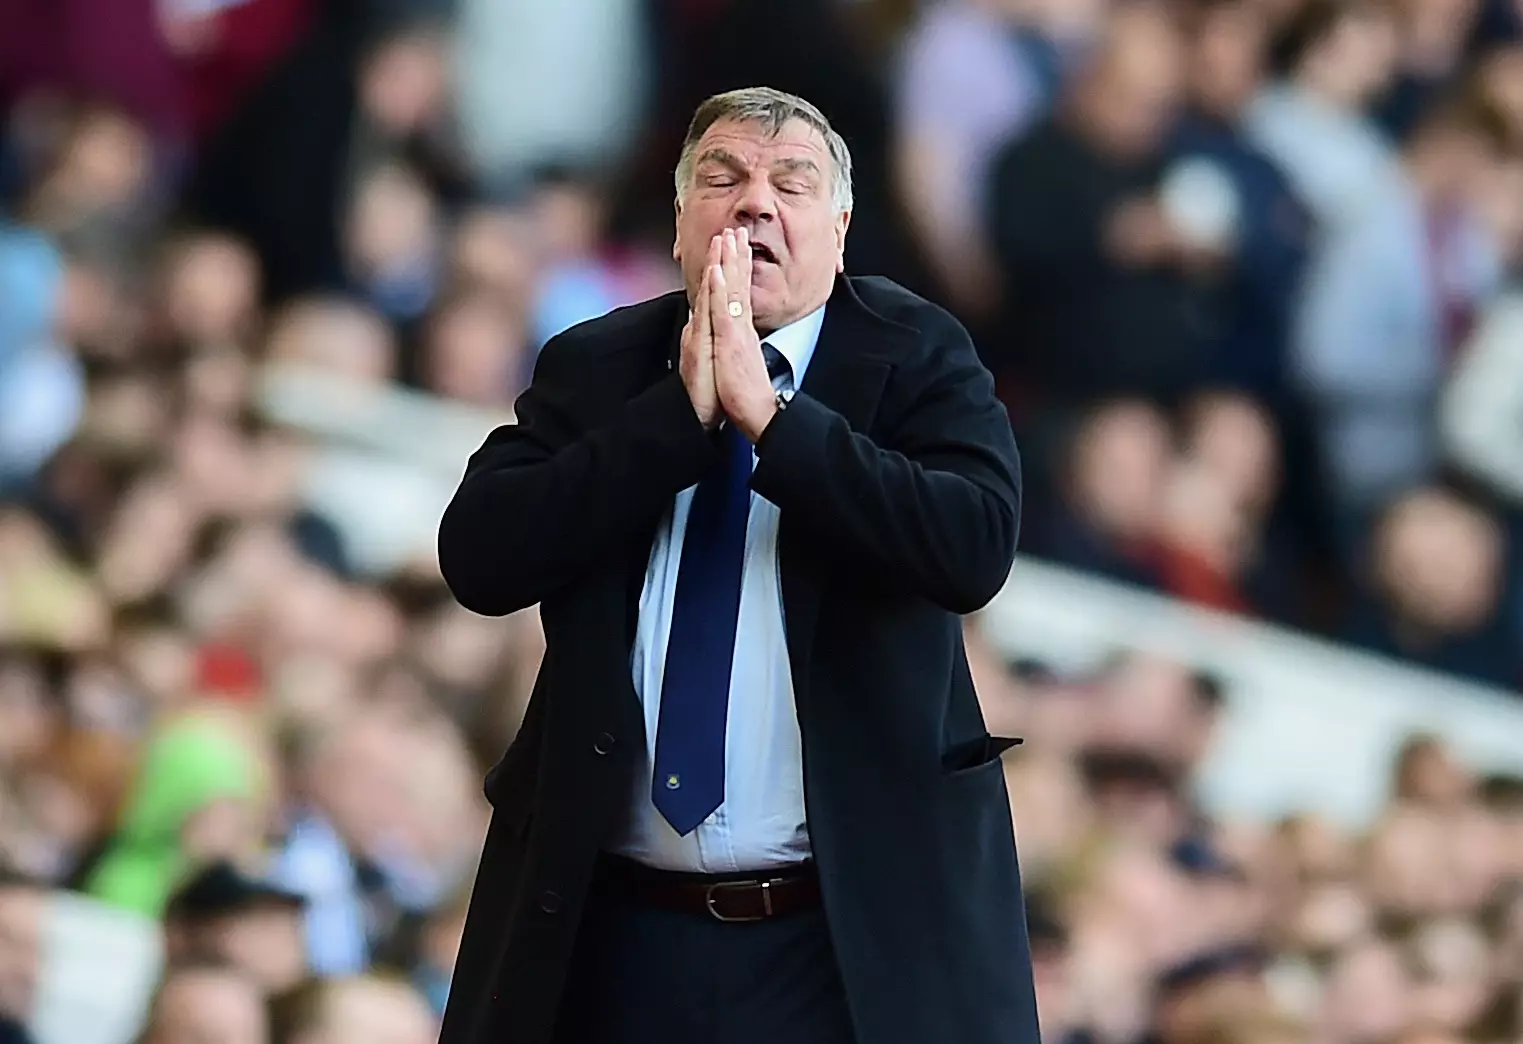 Sam Allardyce Has Reportedly Offered His Resignation As England Manager